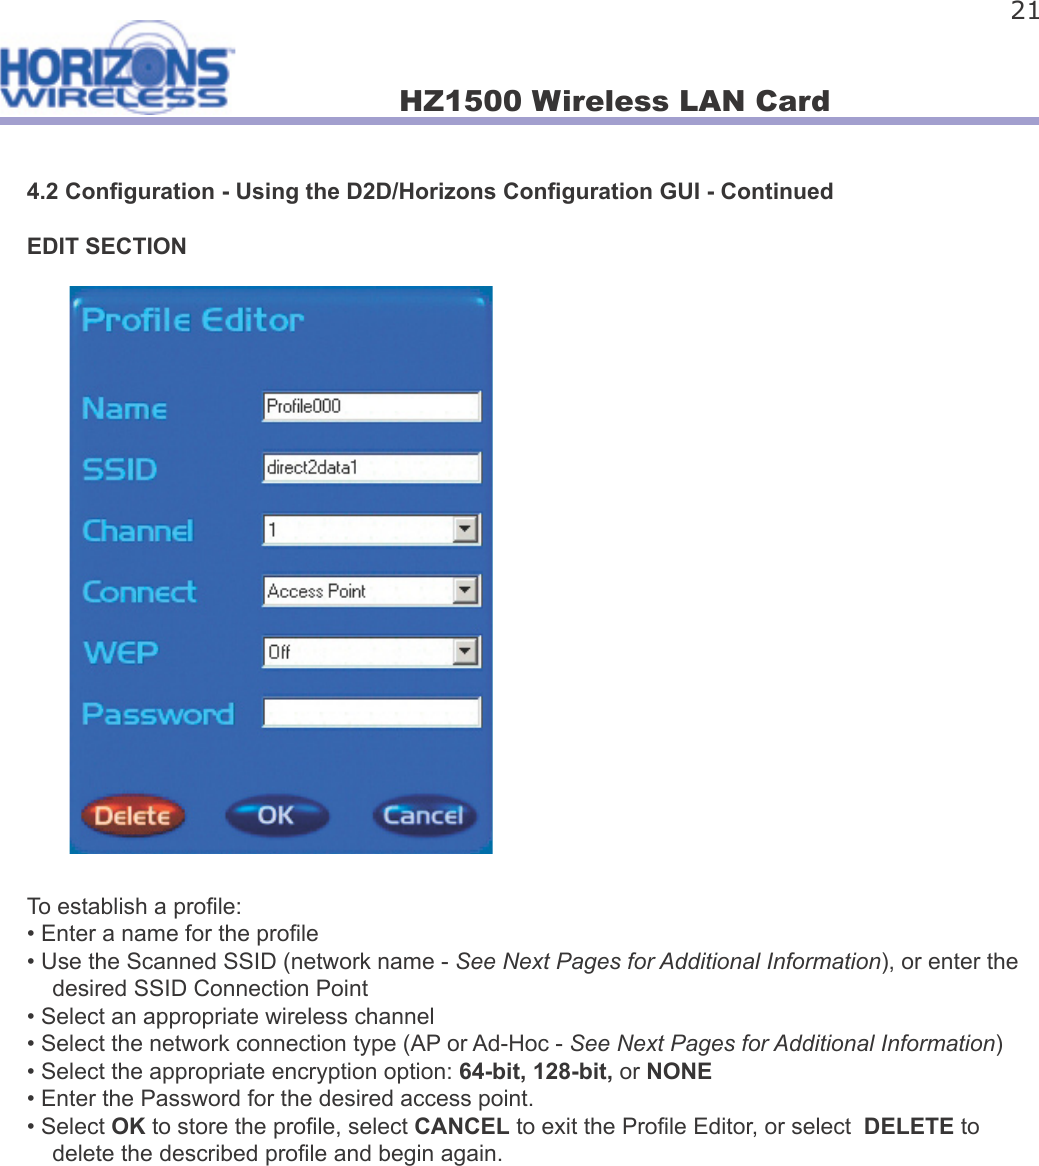 HZ1500 Wireless LAN Card 214.2 Con guration - Using the D2D/Horizons Con guration GUI - ContinuedEDIT SECTIONTo establish a pro le:• Enter a name for the pro le• Use the Scanned SSID (network name - See Next Pages for Additional Information), or enter the     desired SSID Connection Point• Select an appropriate wireless channel• Select the network connection type (AP or Ad-Hoc - See Next Pages for Additional Information)• Select the appropriate encryption option: 64-bit, 128-bit, or NONE• Enter the Password for the desired access point.• Select OK to store the pro le, select CANCEL to exit the Pro le Editor, or select  DELETE to     delete the described pro le and begin again.